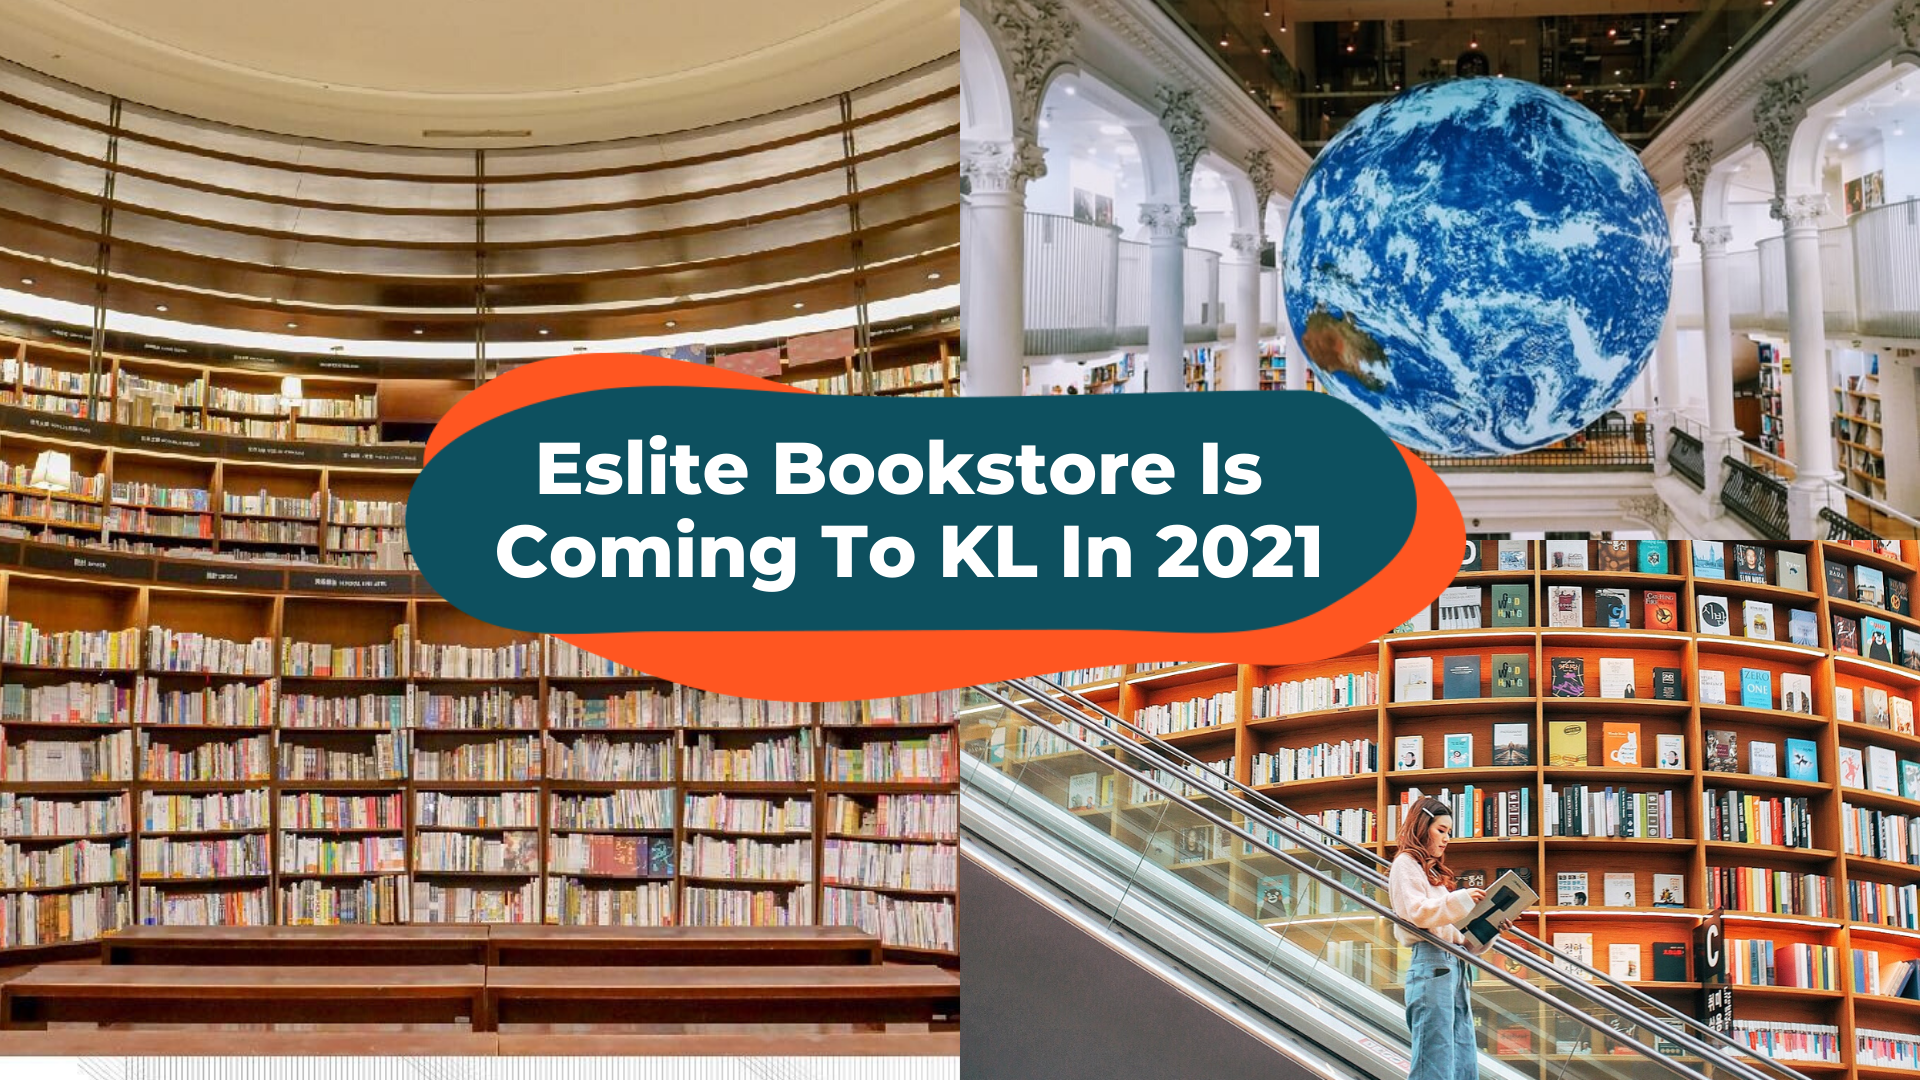 Taiwan's Largest Retail Bookstore  Eslite Bookstore Is Coming To